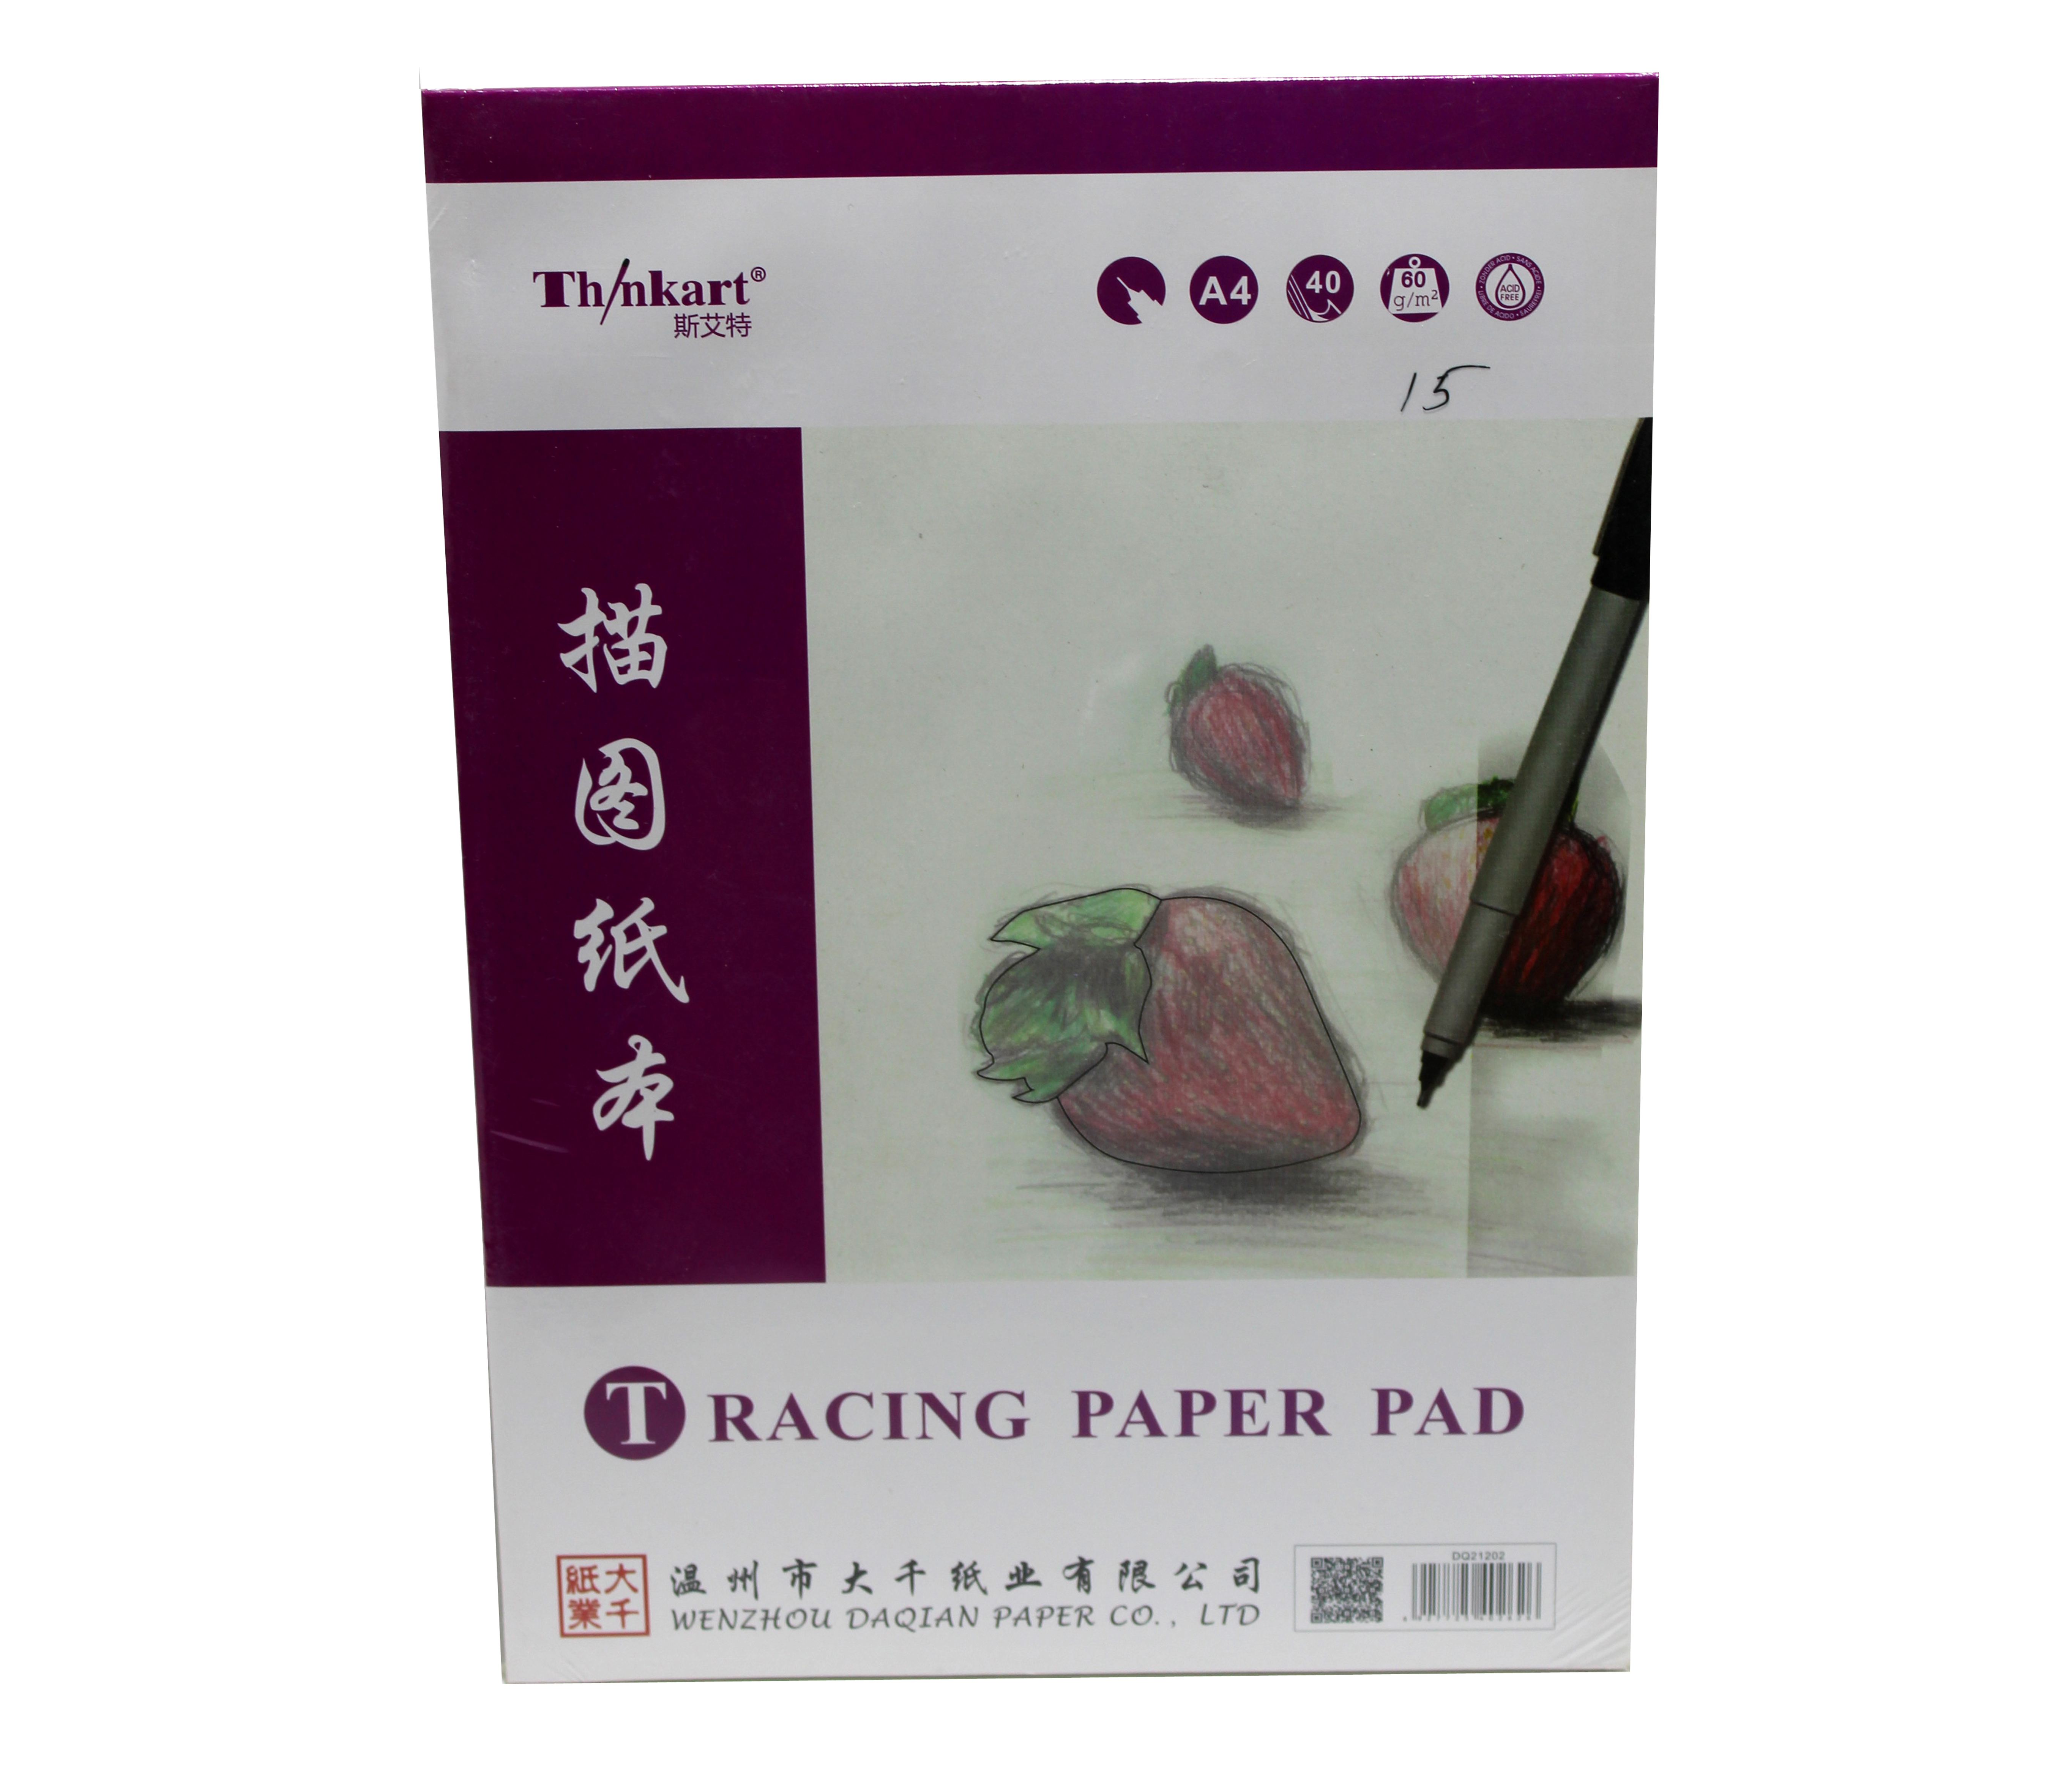 THINKART TRACING PAD A4 SIZE DQ21202